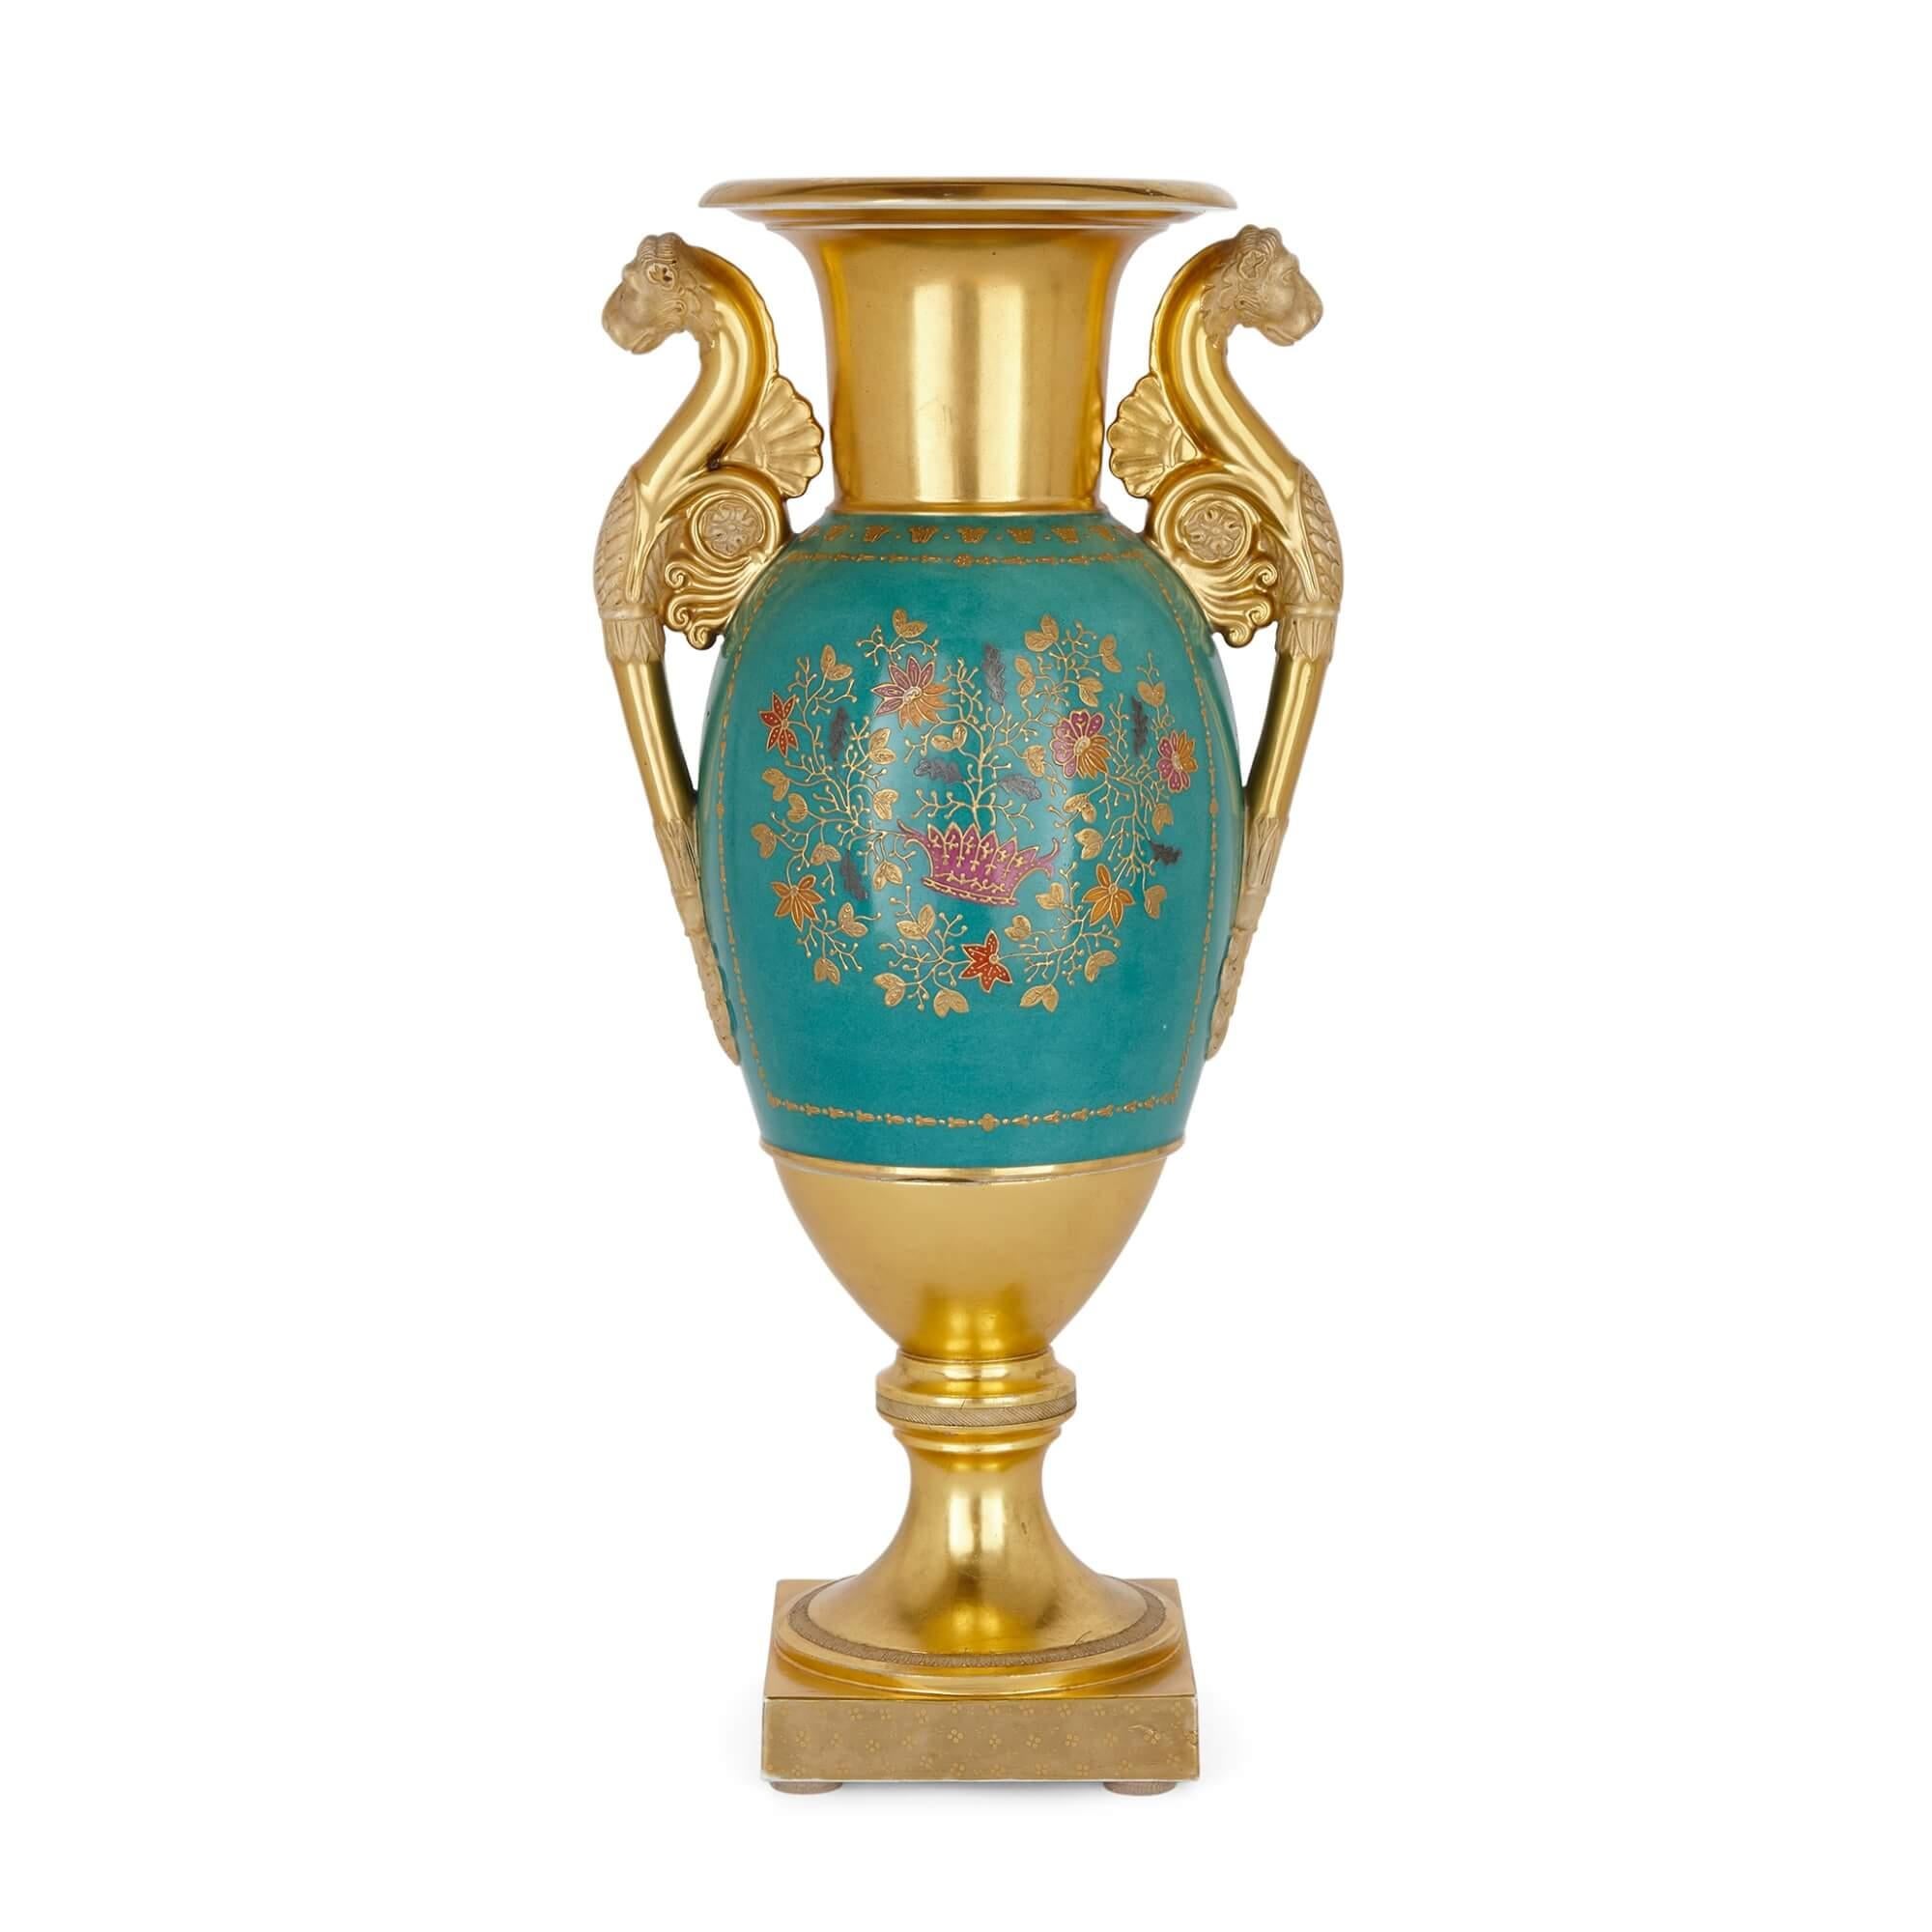 A fine and important gilt ground porcelain vase by the Gardner Factory
Russian, c. 1830
Height 43cm, width 21cm, depth 15cm

This fine antique vase is the work of the celebrated Russian Gardner Factory (founded 1766), considered to be the first